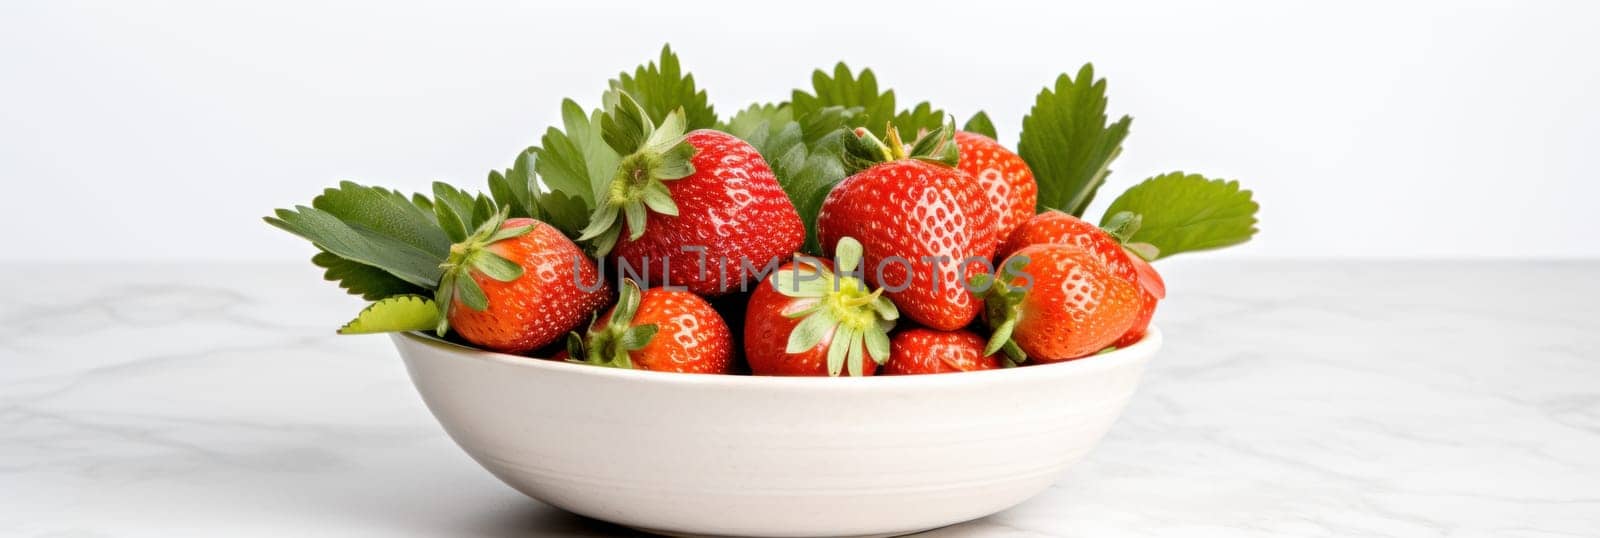 A white bowl filled with lots of ripe strawberries, AI by starush